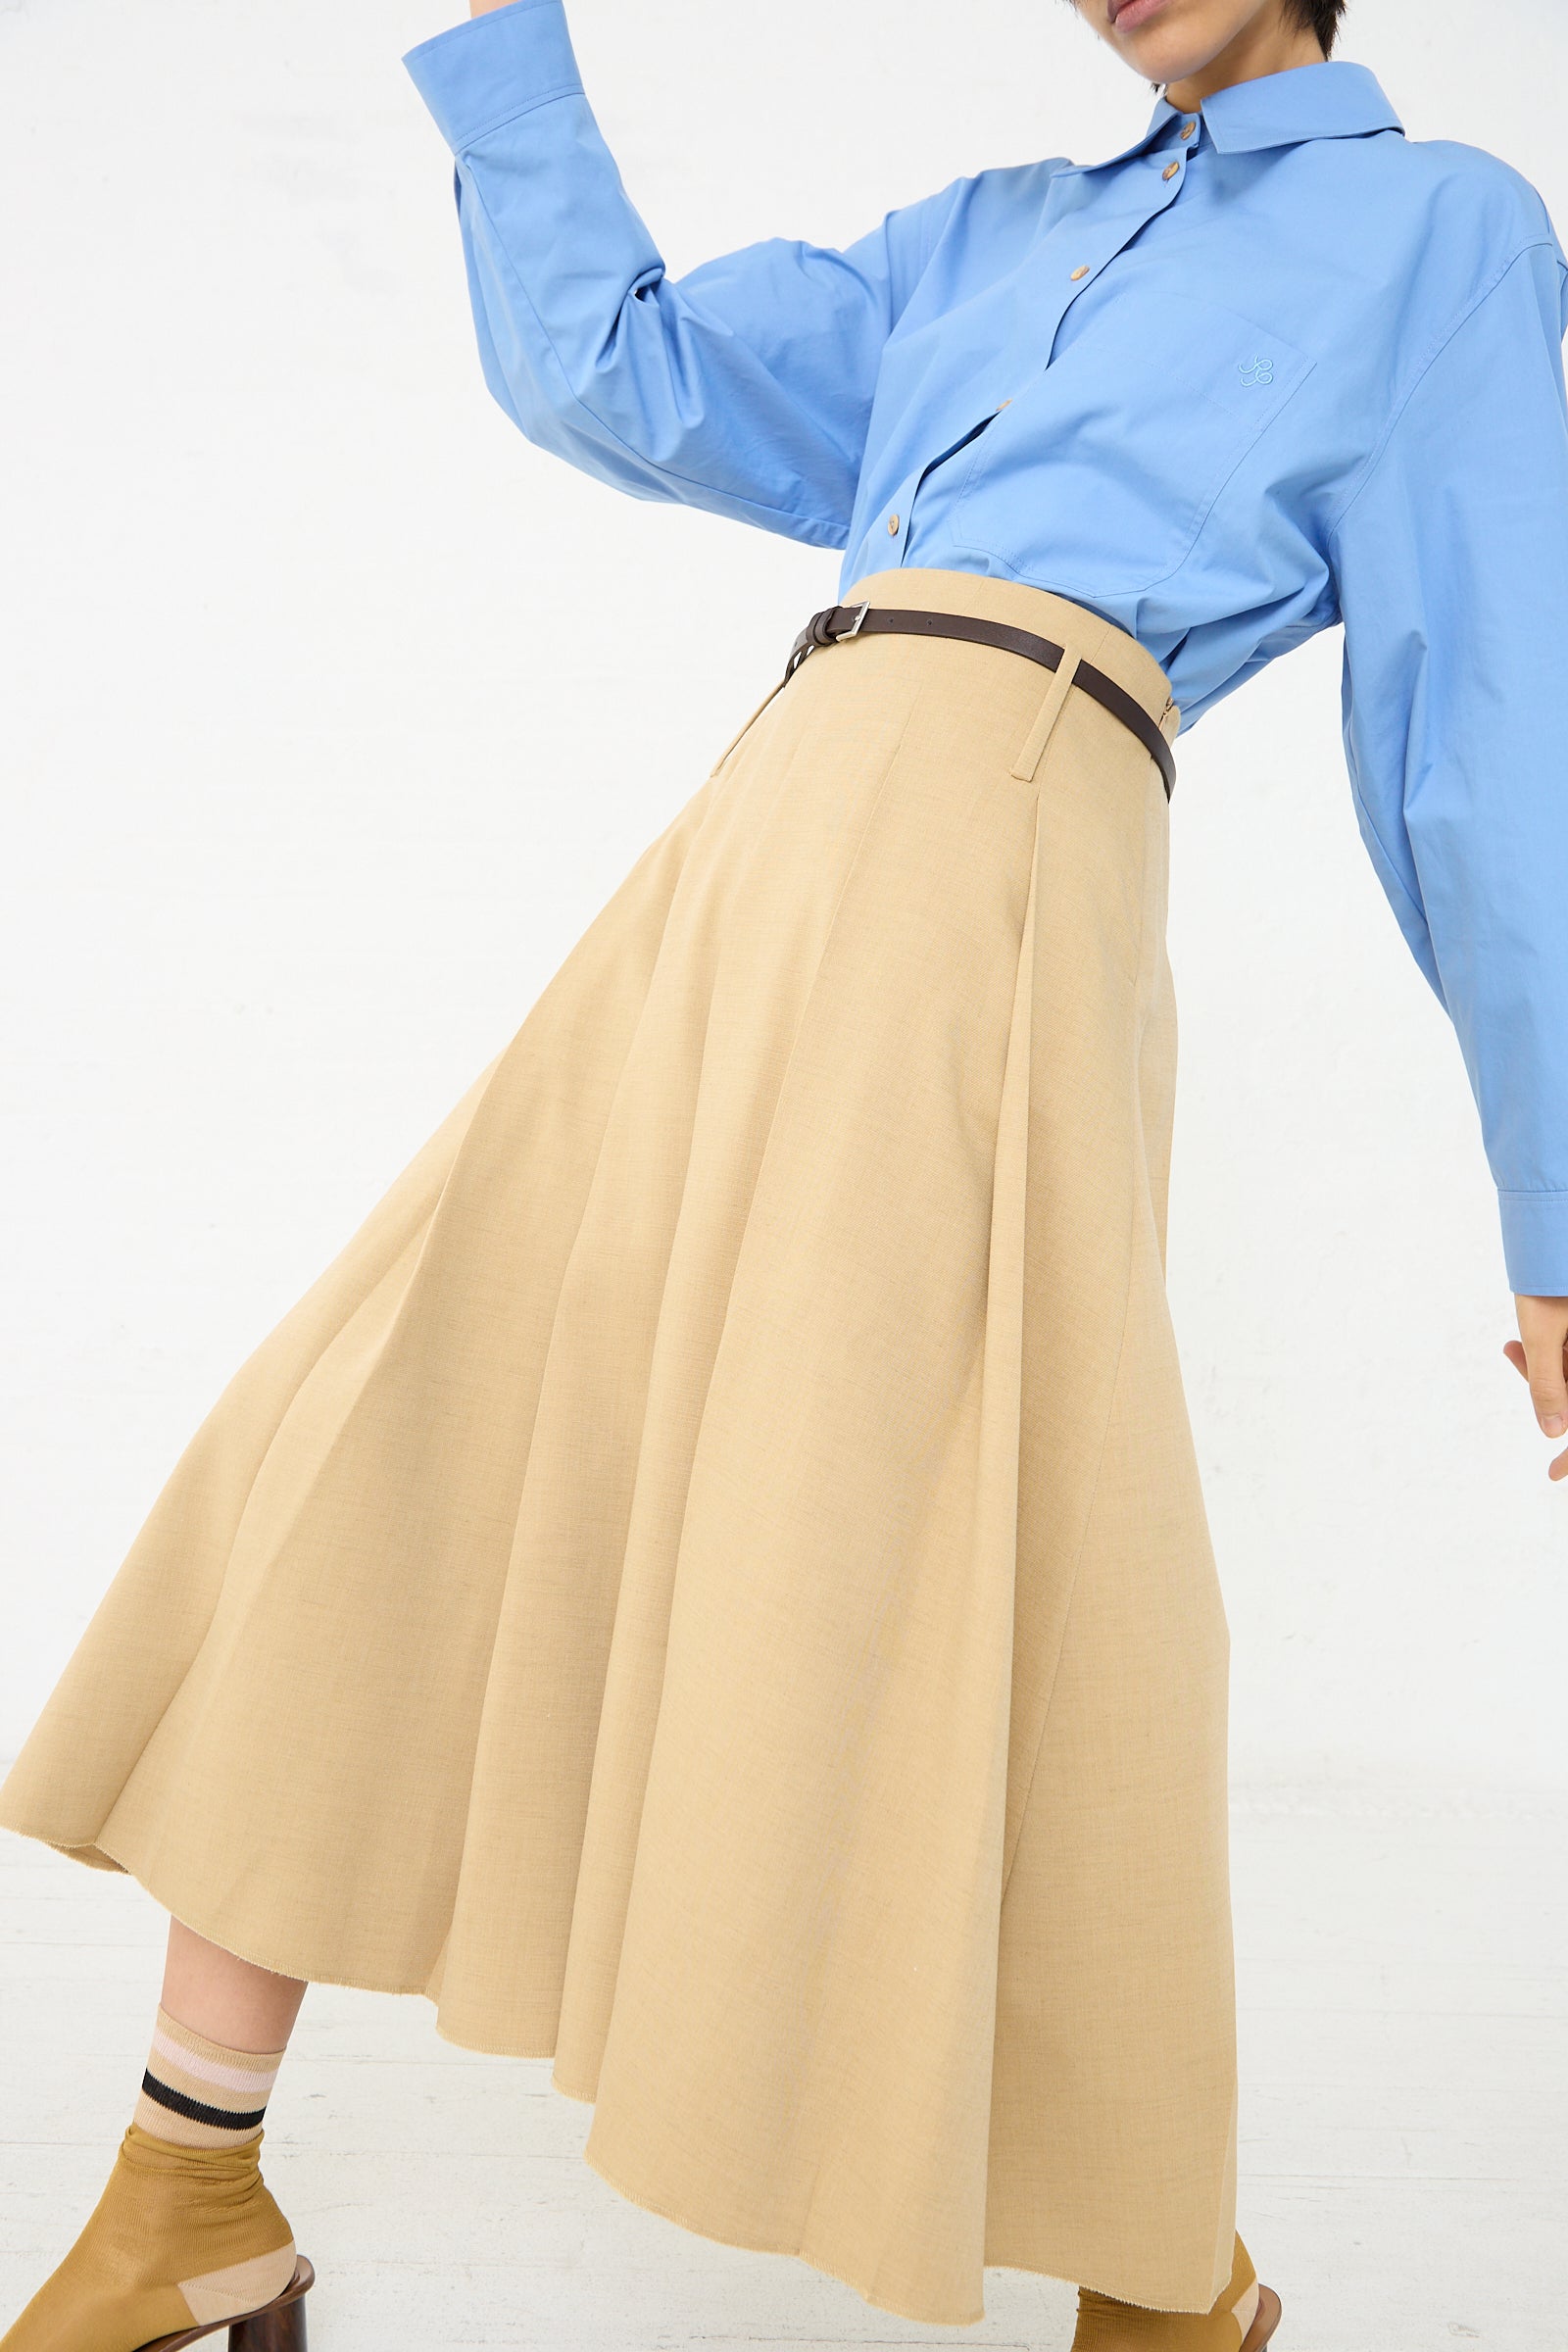 A woman in a blue shirt and Rejina Pyo's Odette Skirt in Beige. Front view. 